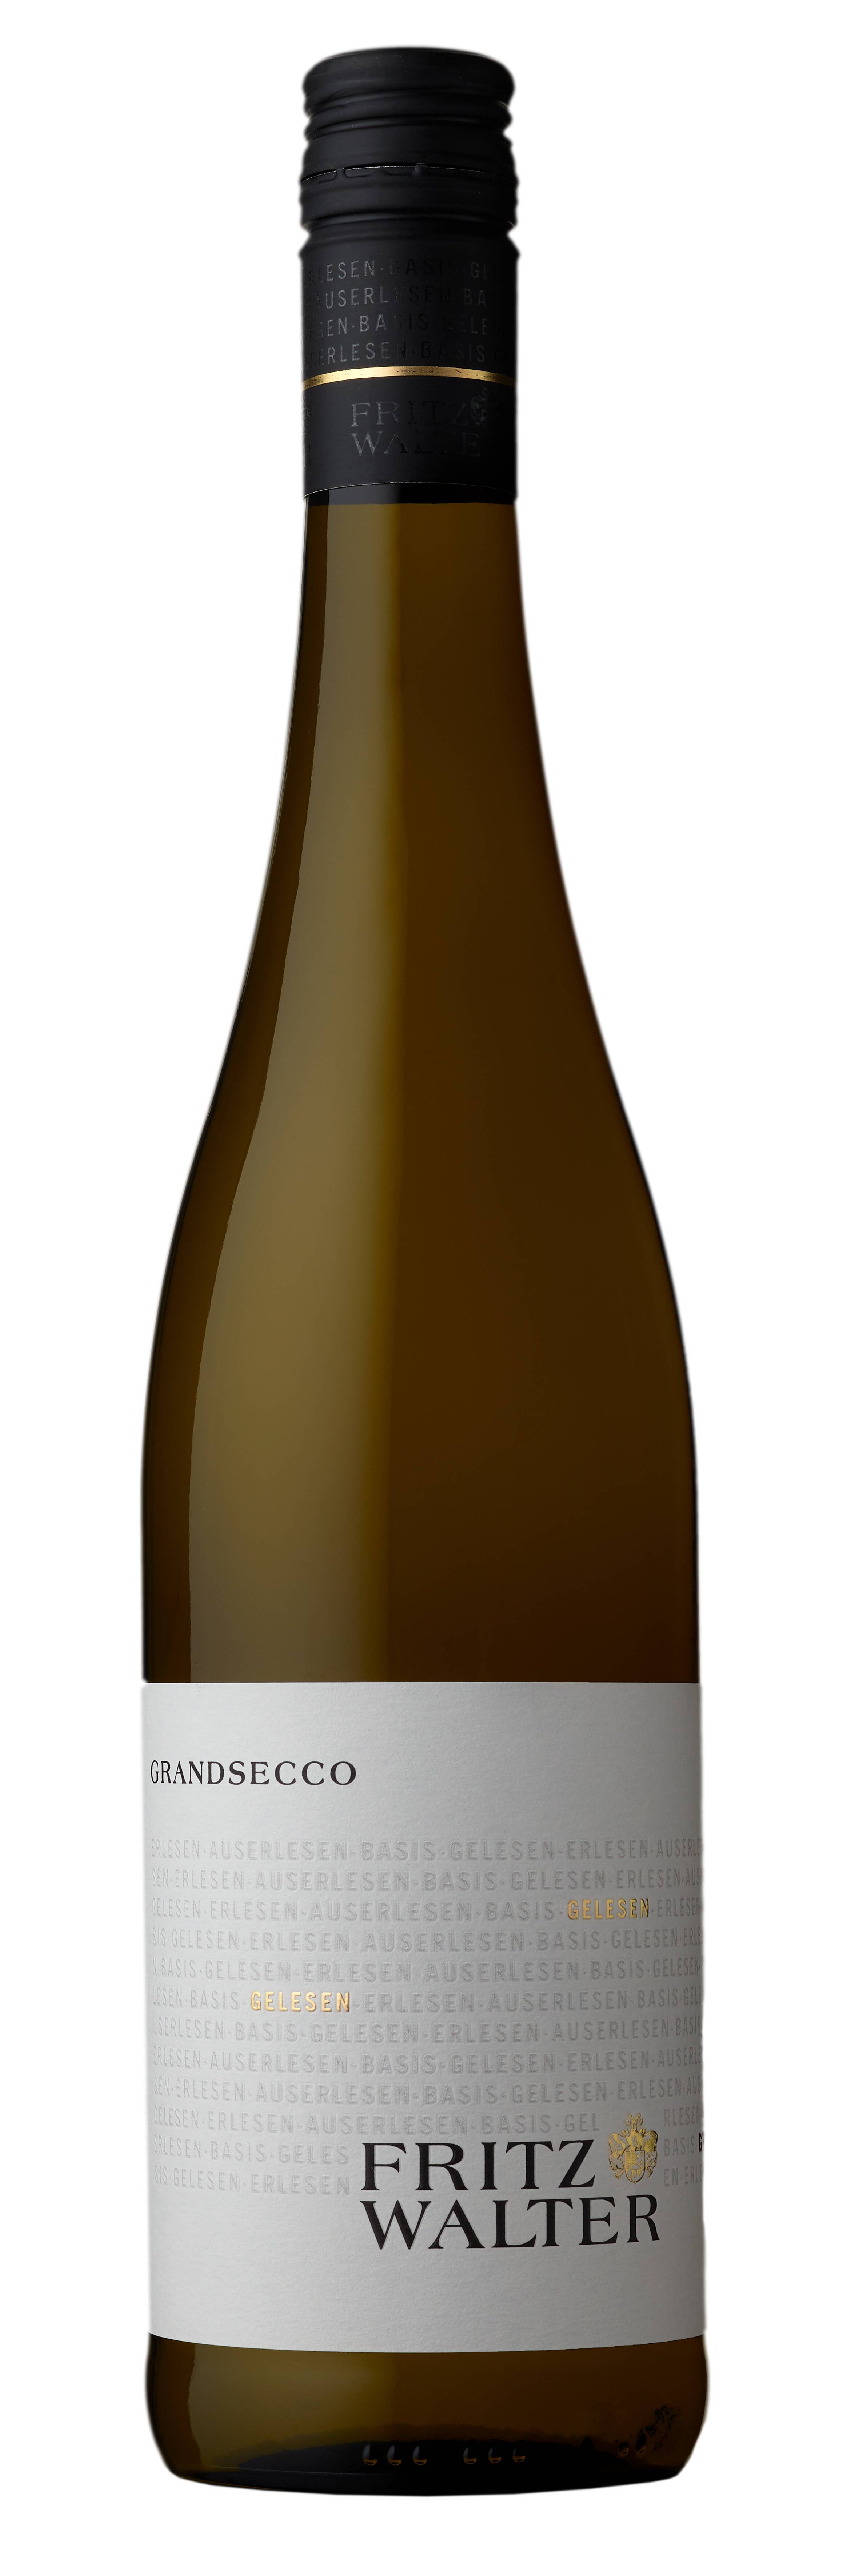 GrandSecco weiss